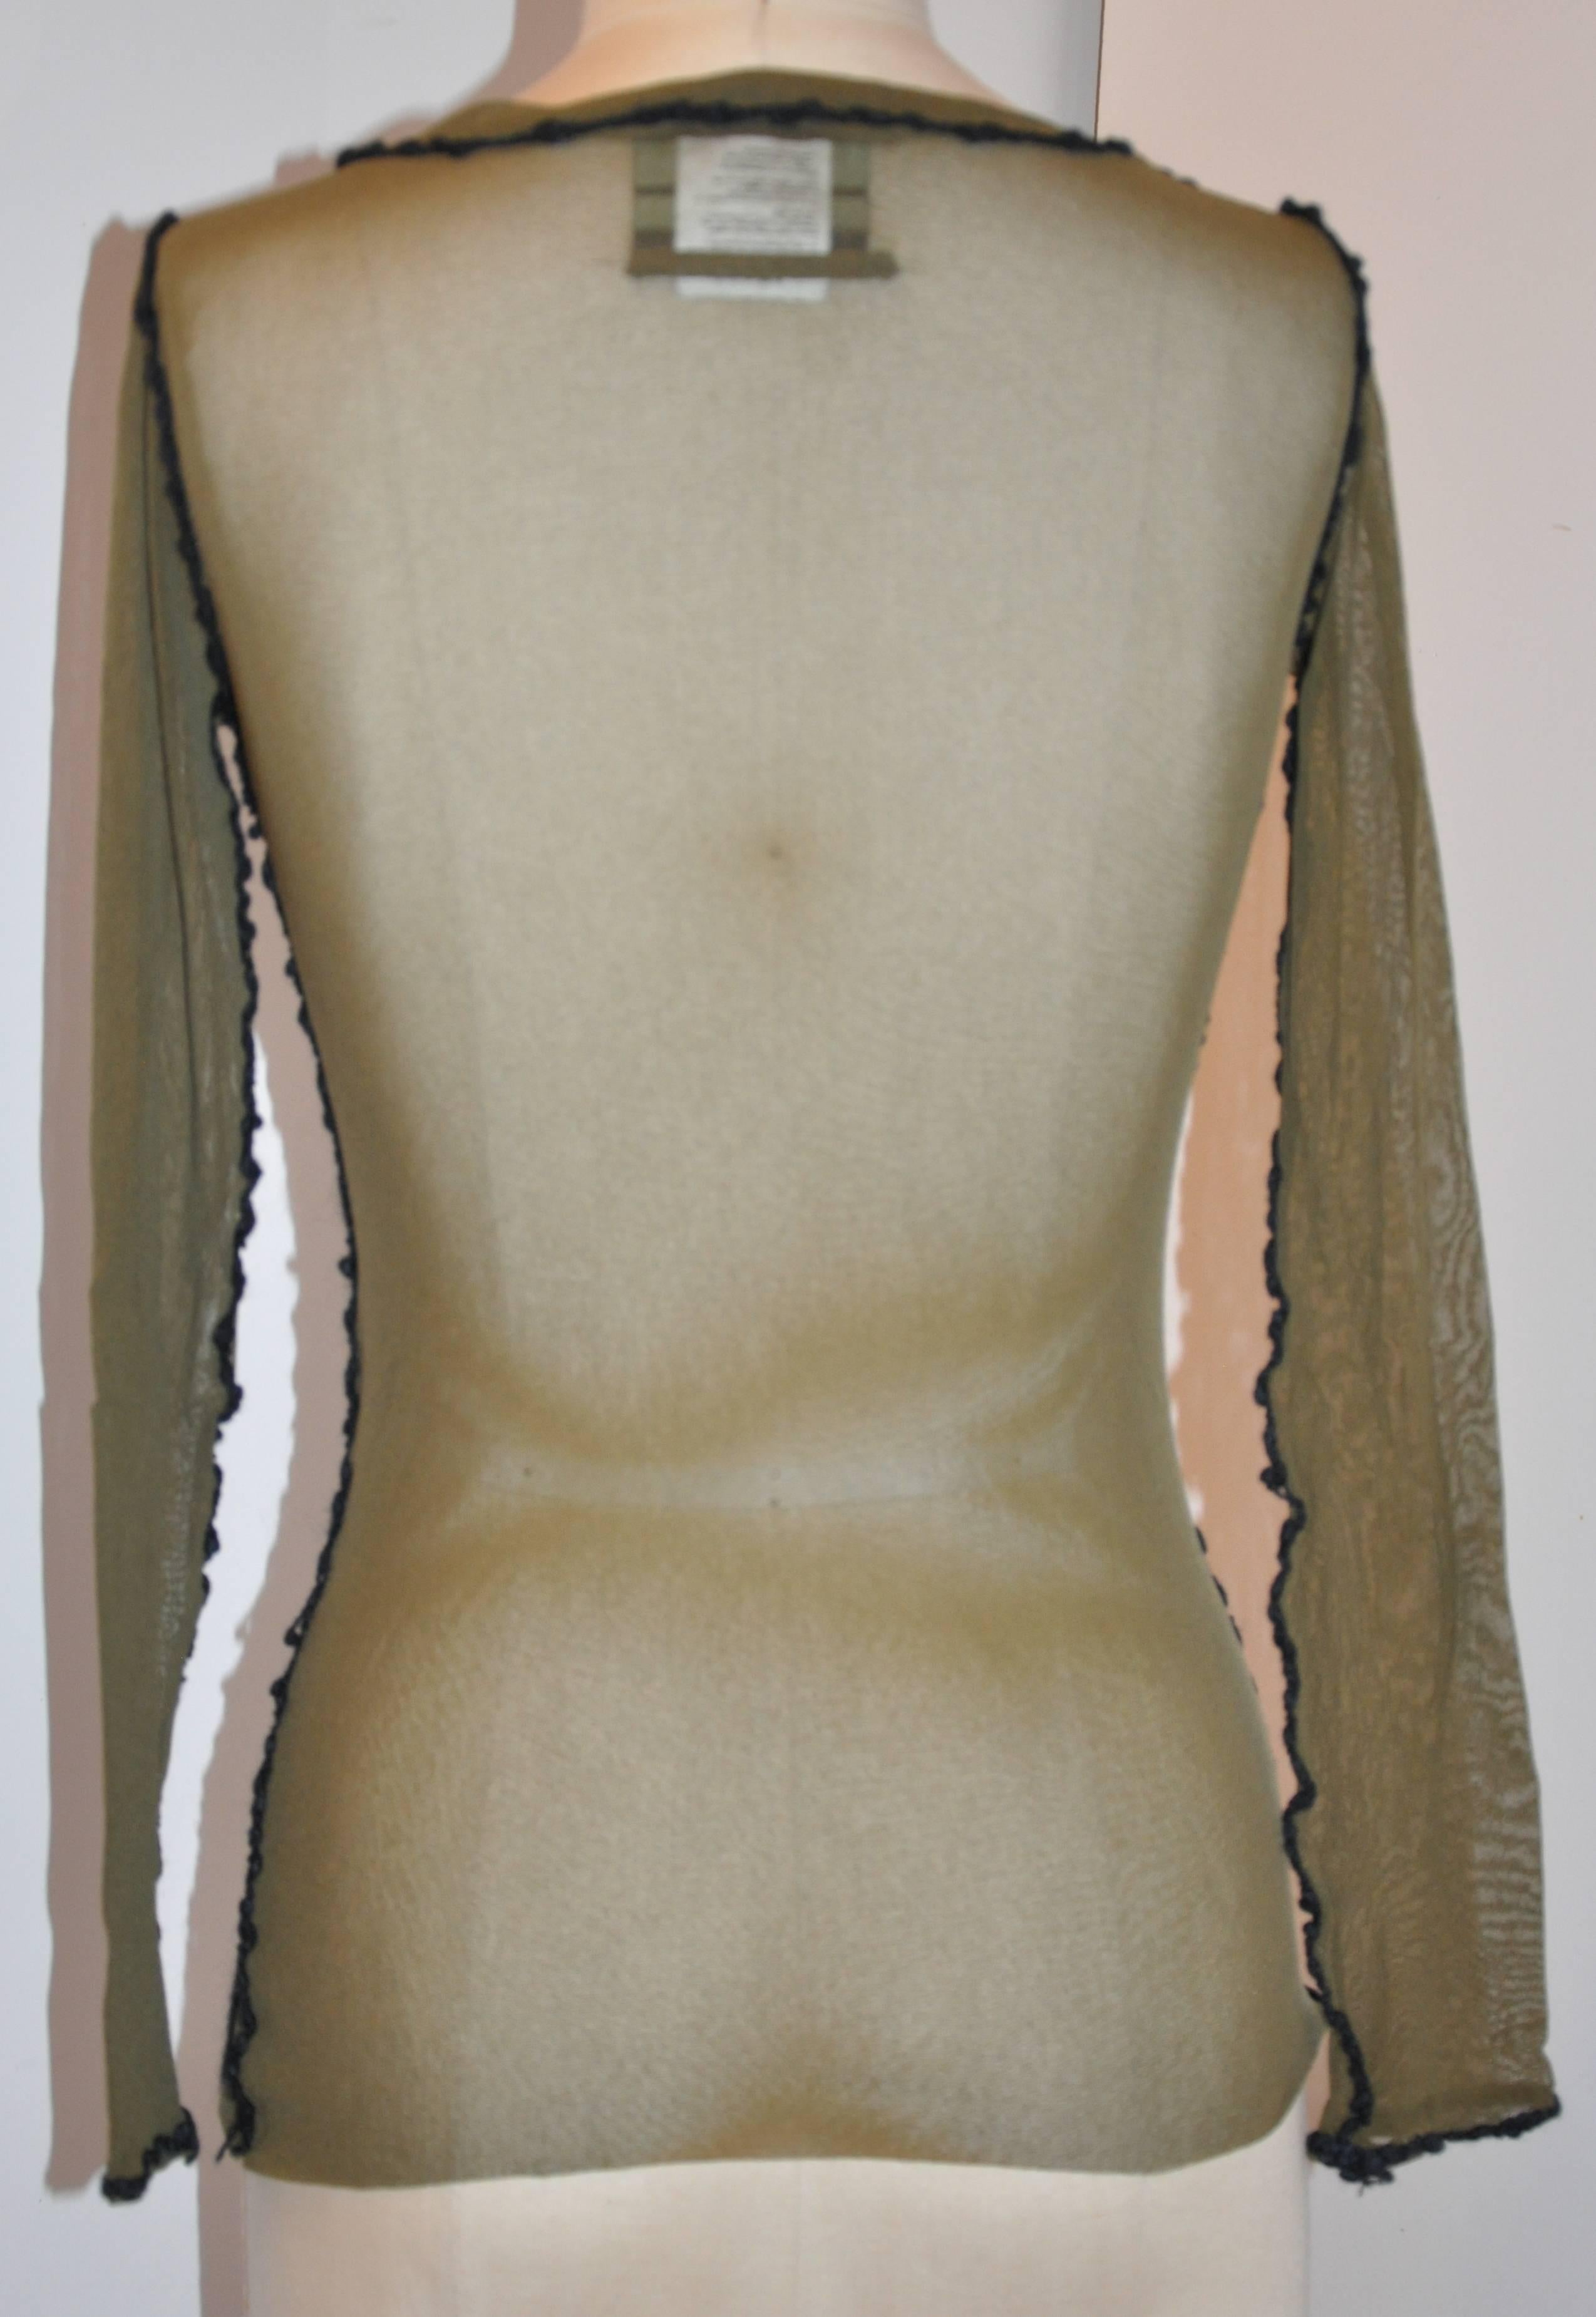 Jean Paul Gaultier stretched olive green netted accented with black embroidered pullover top has a slight 'boat-neck